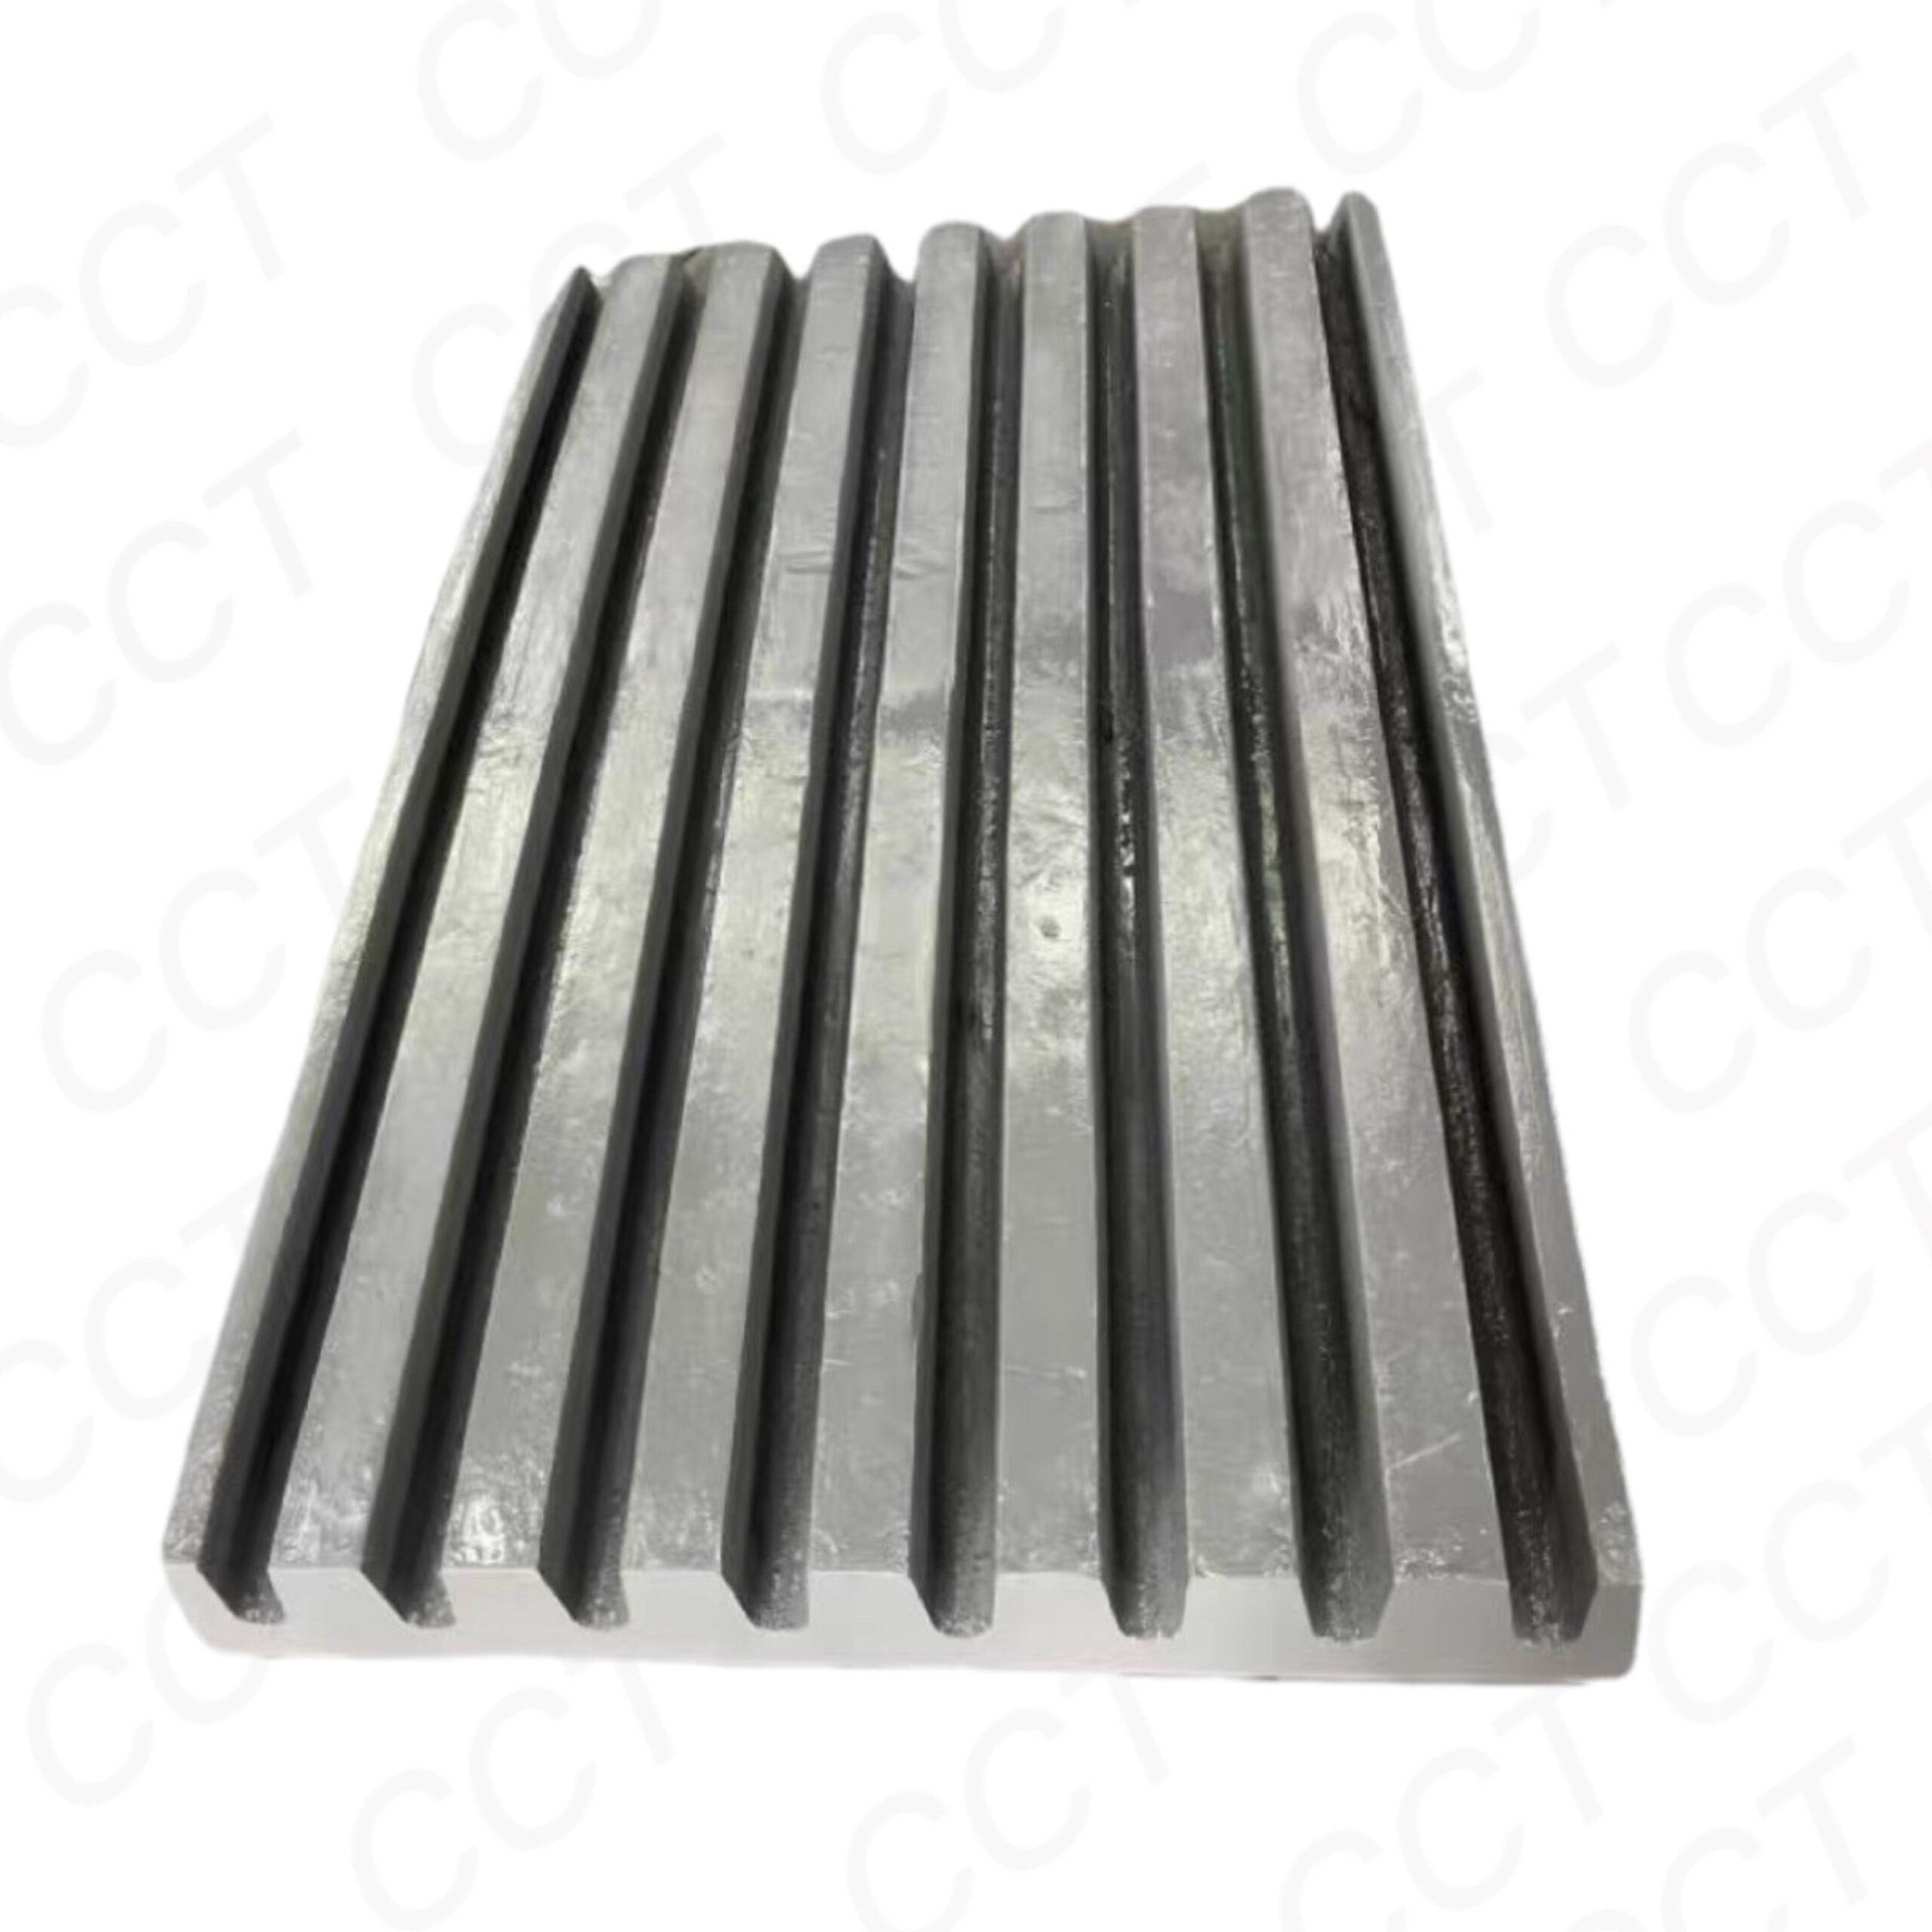 Jaw Plate CT-0008